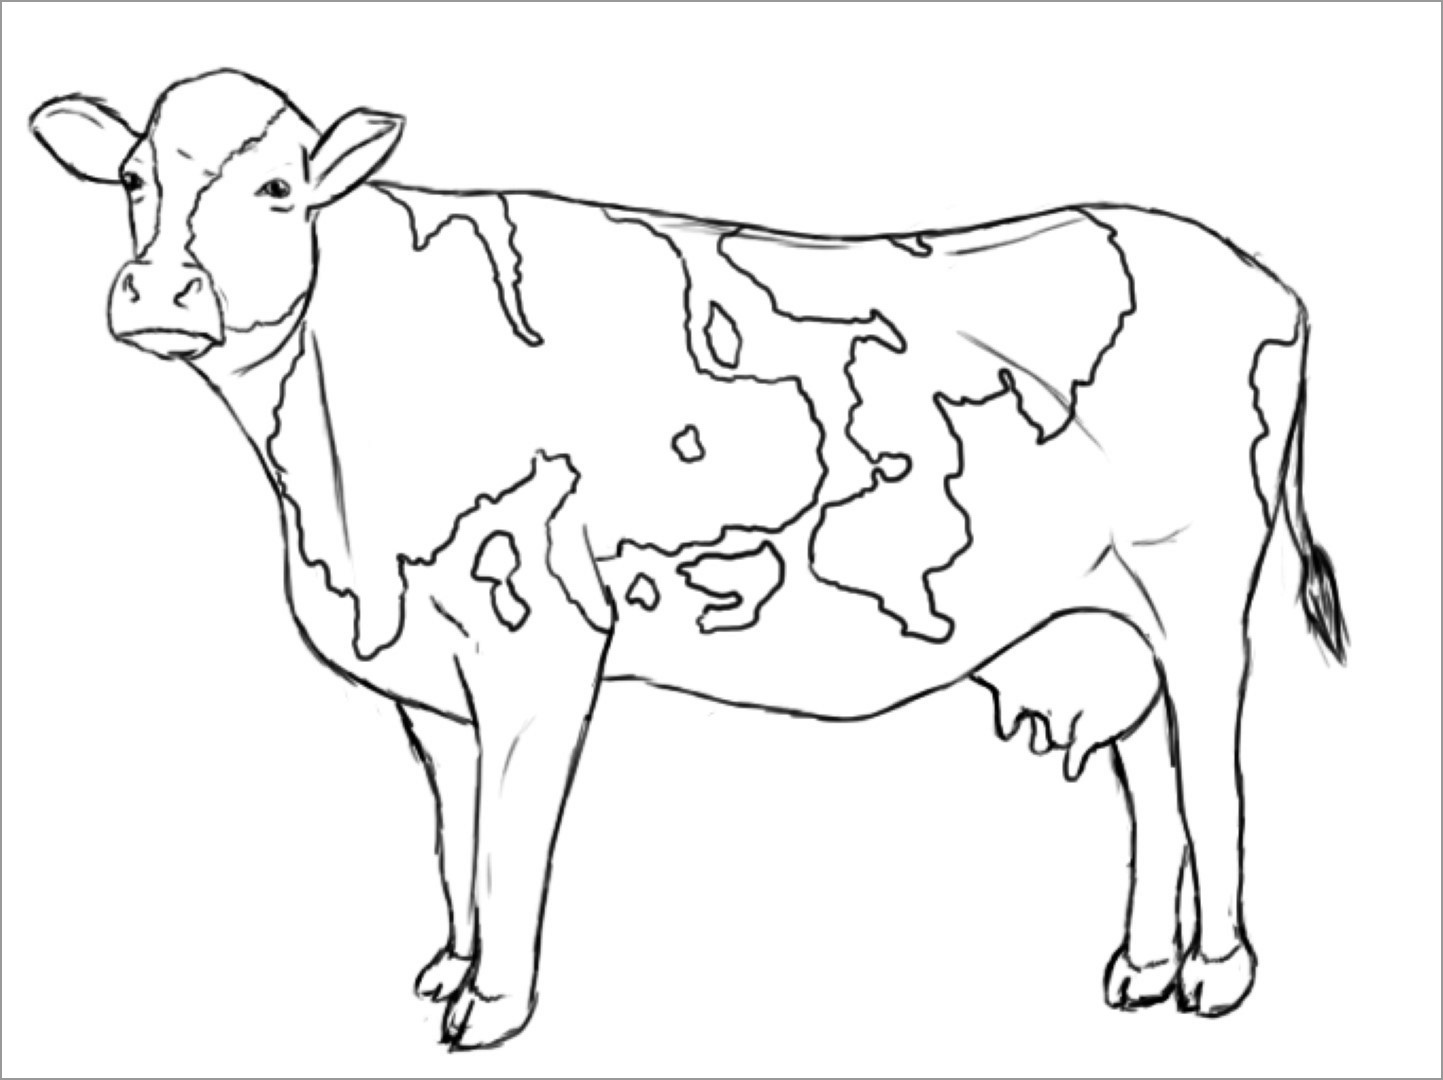 Cattle Coloring Page for Kids